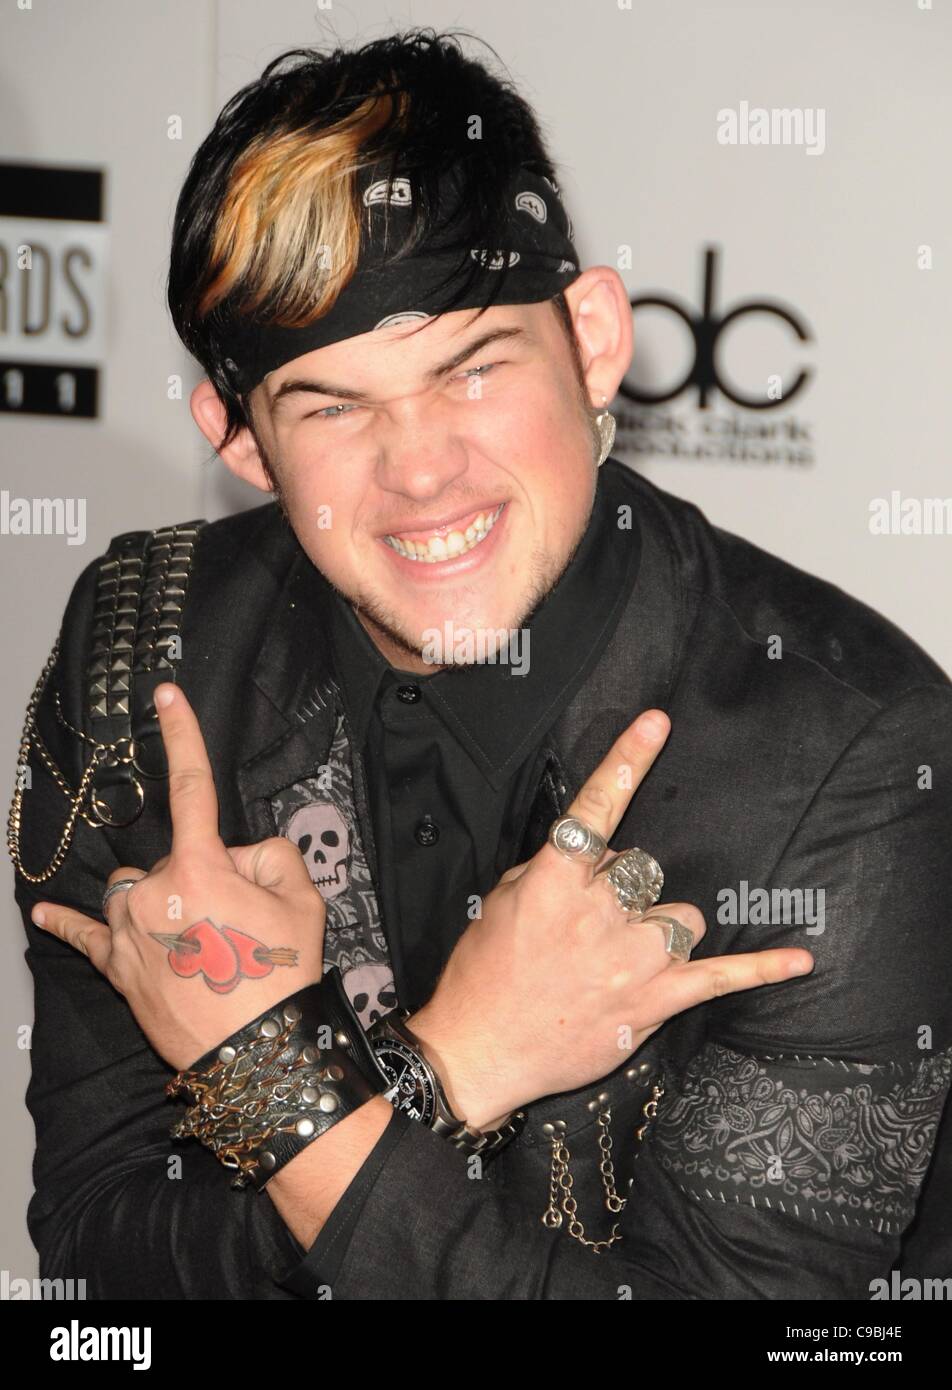 James Durbin at arrivals for The 38th Annual American Music Awards - ARRIVALS, Nokia Theatre at L.A. LIVE, Los Angeles, CA November 20, 2011. Photo By: Dee Cercone/Everett Collection Stock Photo